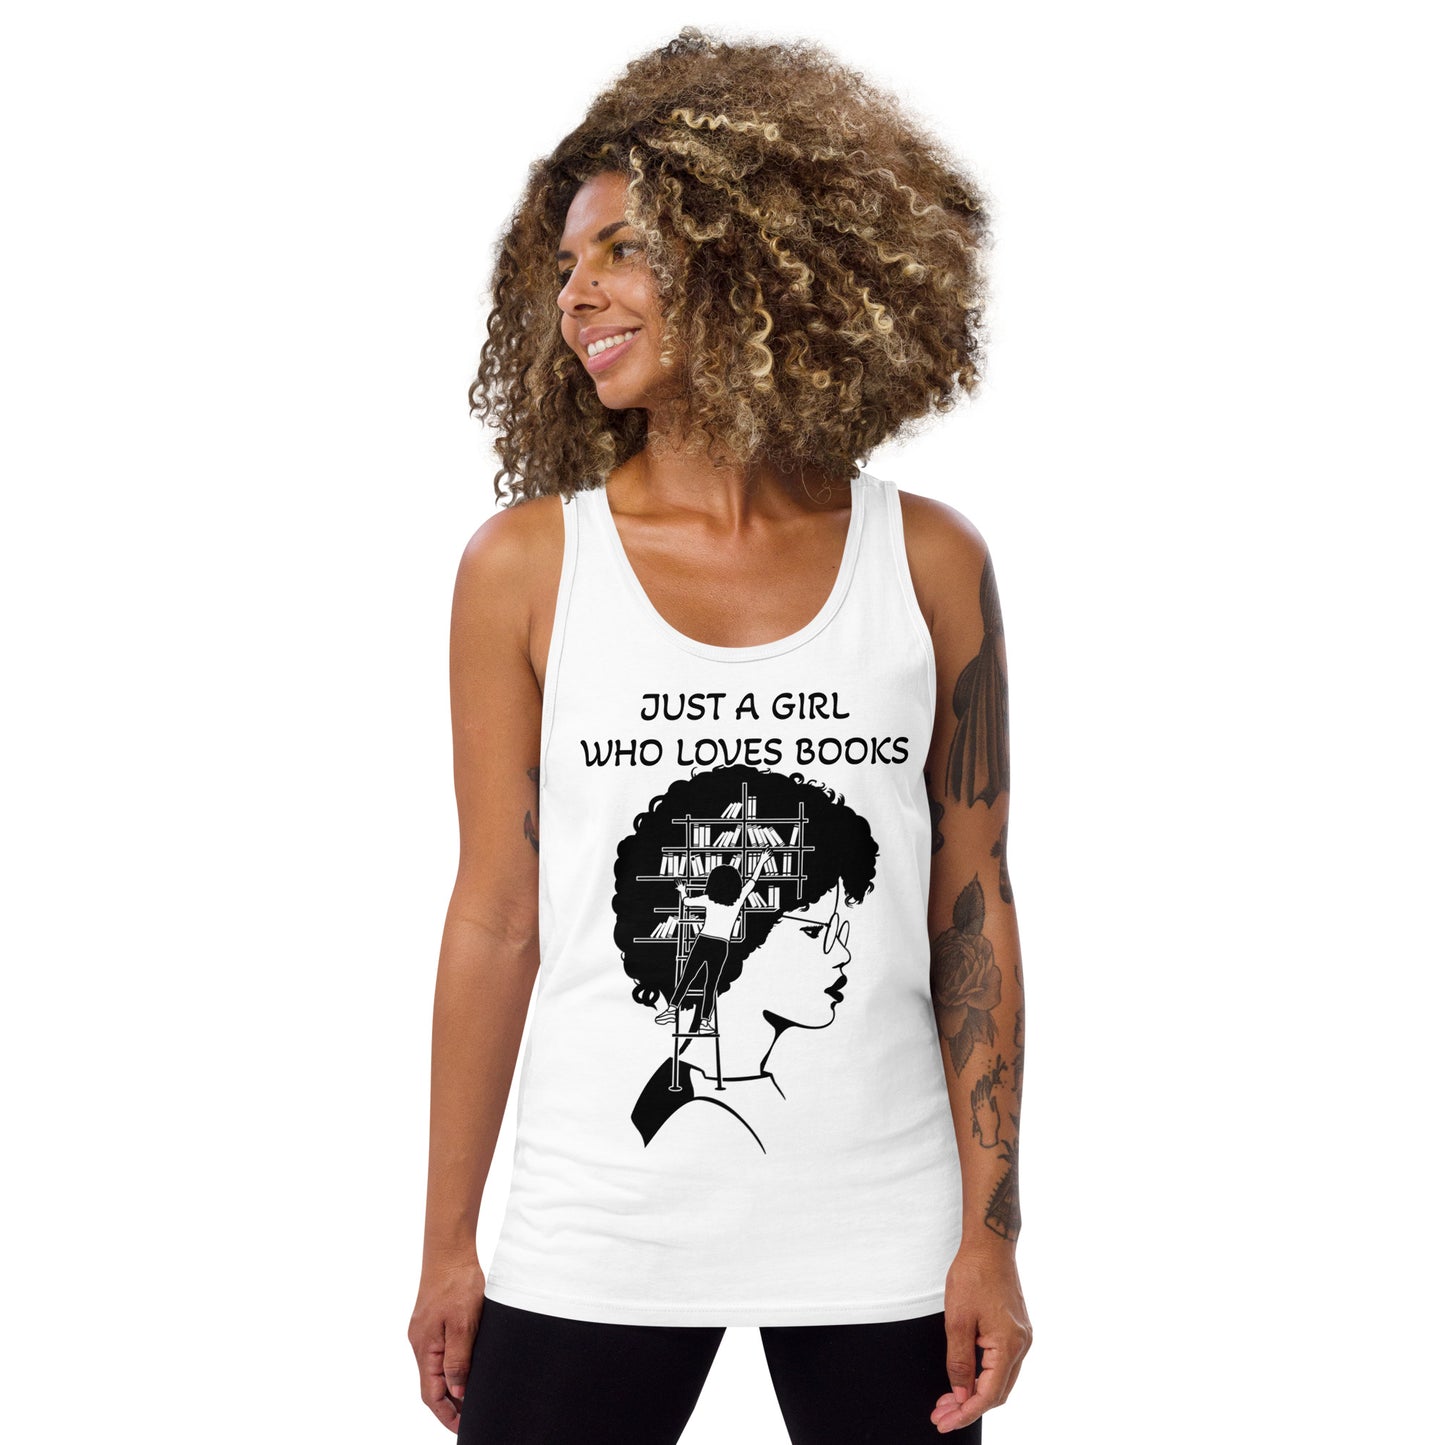 JUST A GIRL WHO LOVES BOOKS- Unisex Tank Top